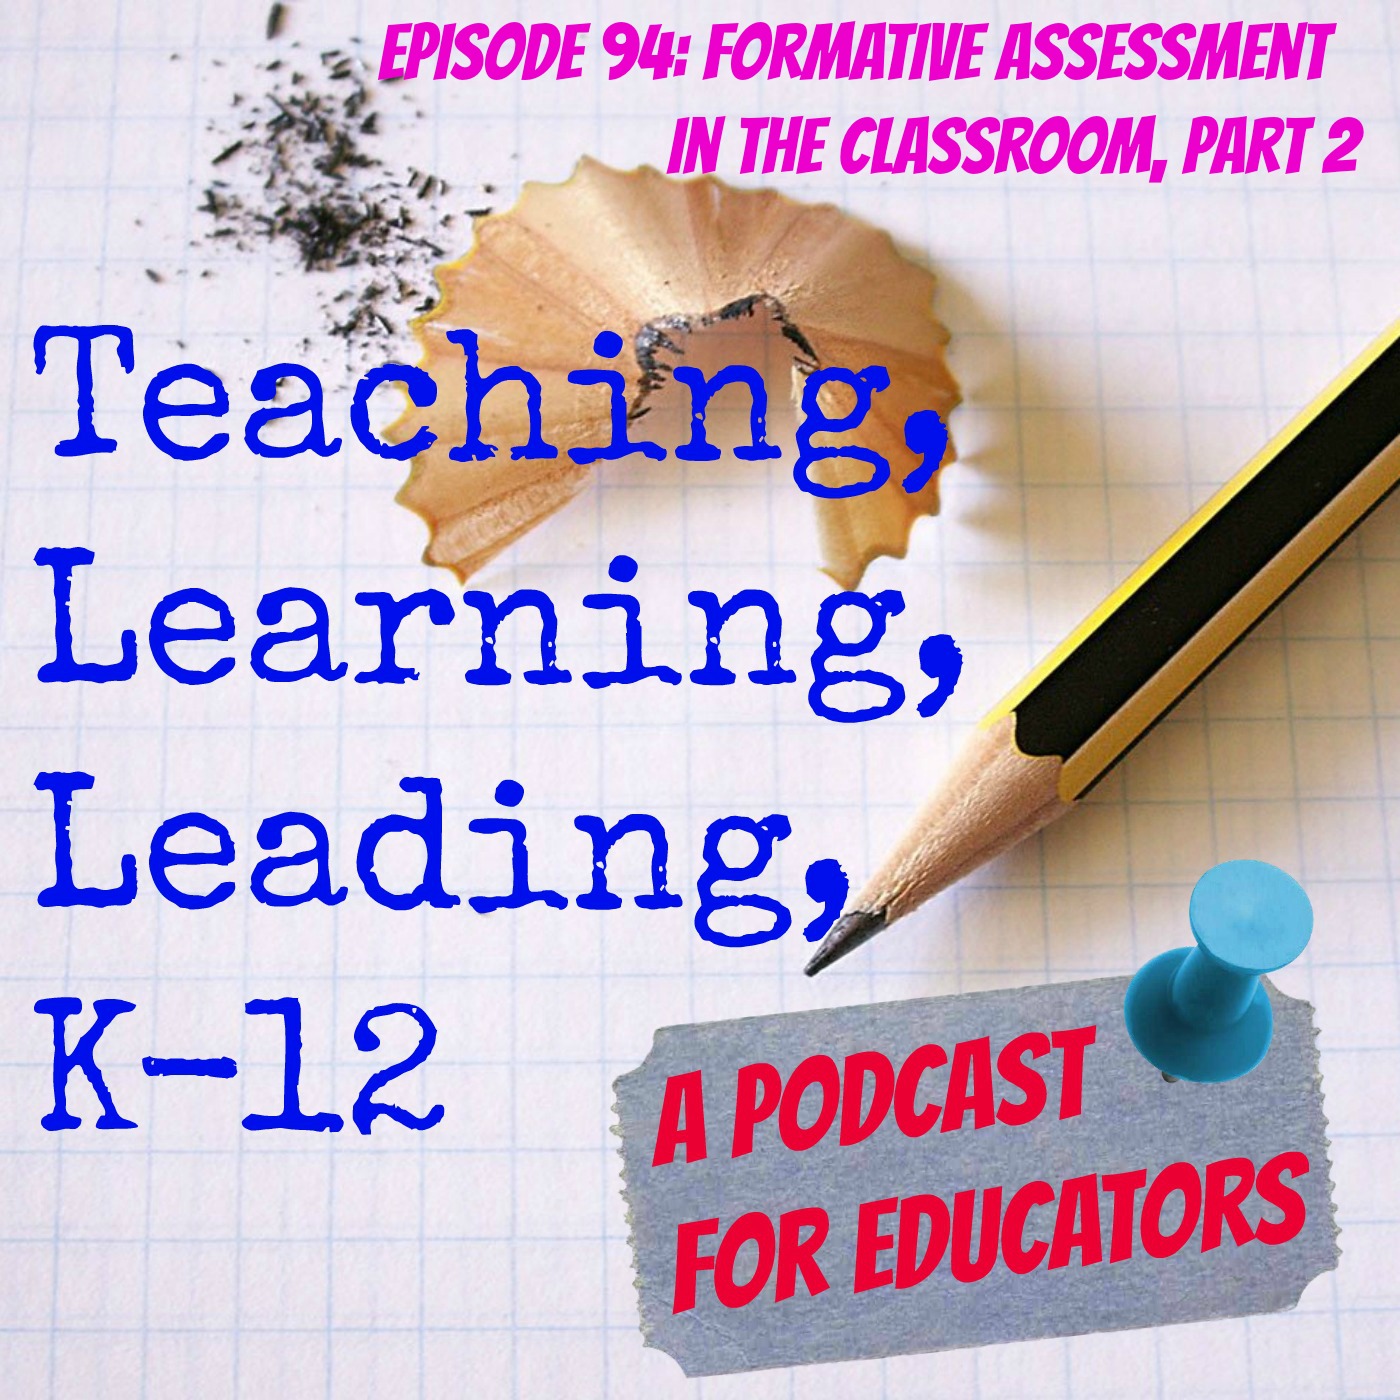 Episode 94: Formative Assessment in the Classroom, Part 2